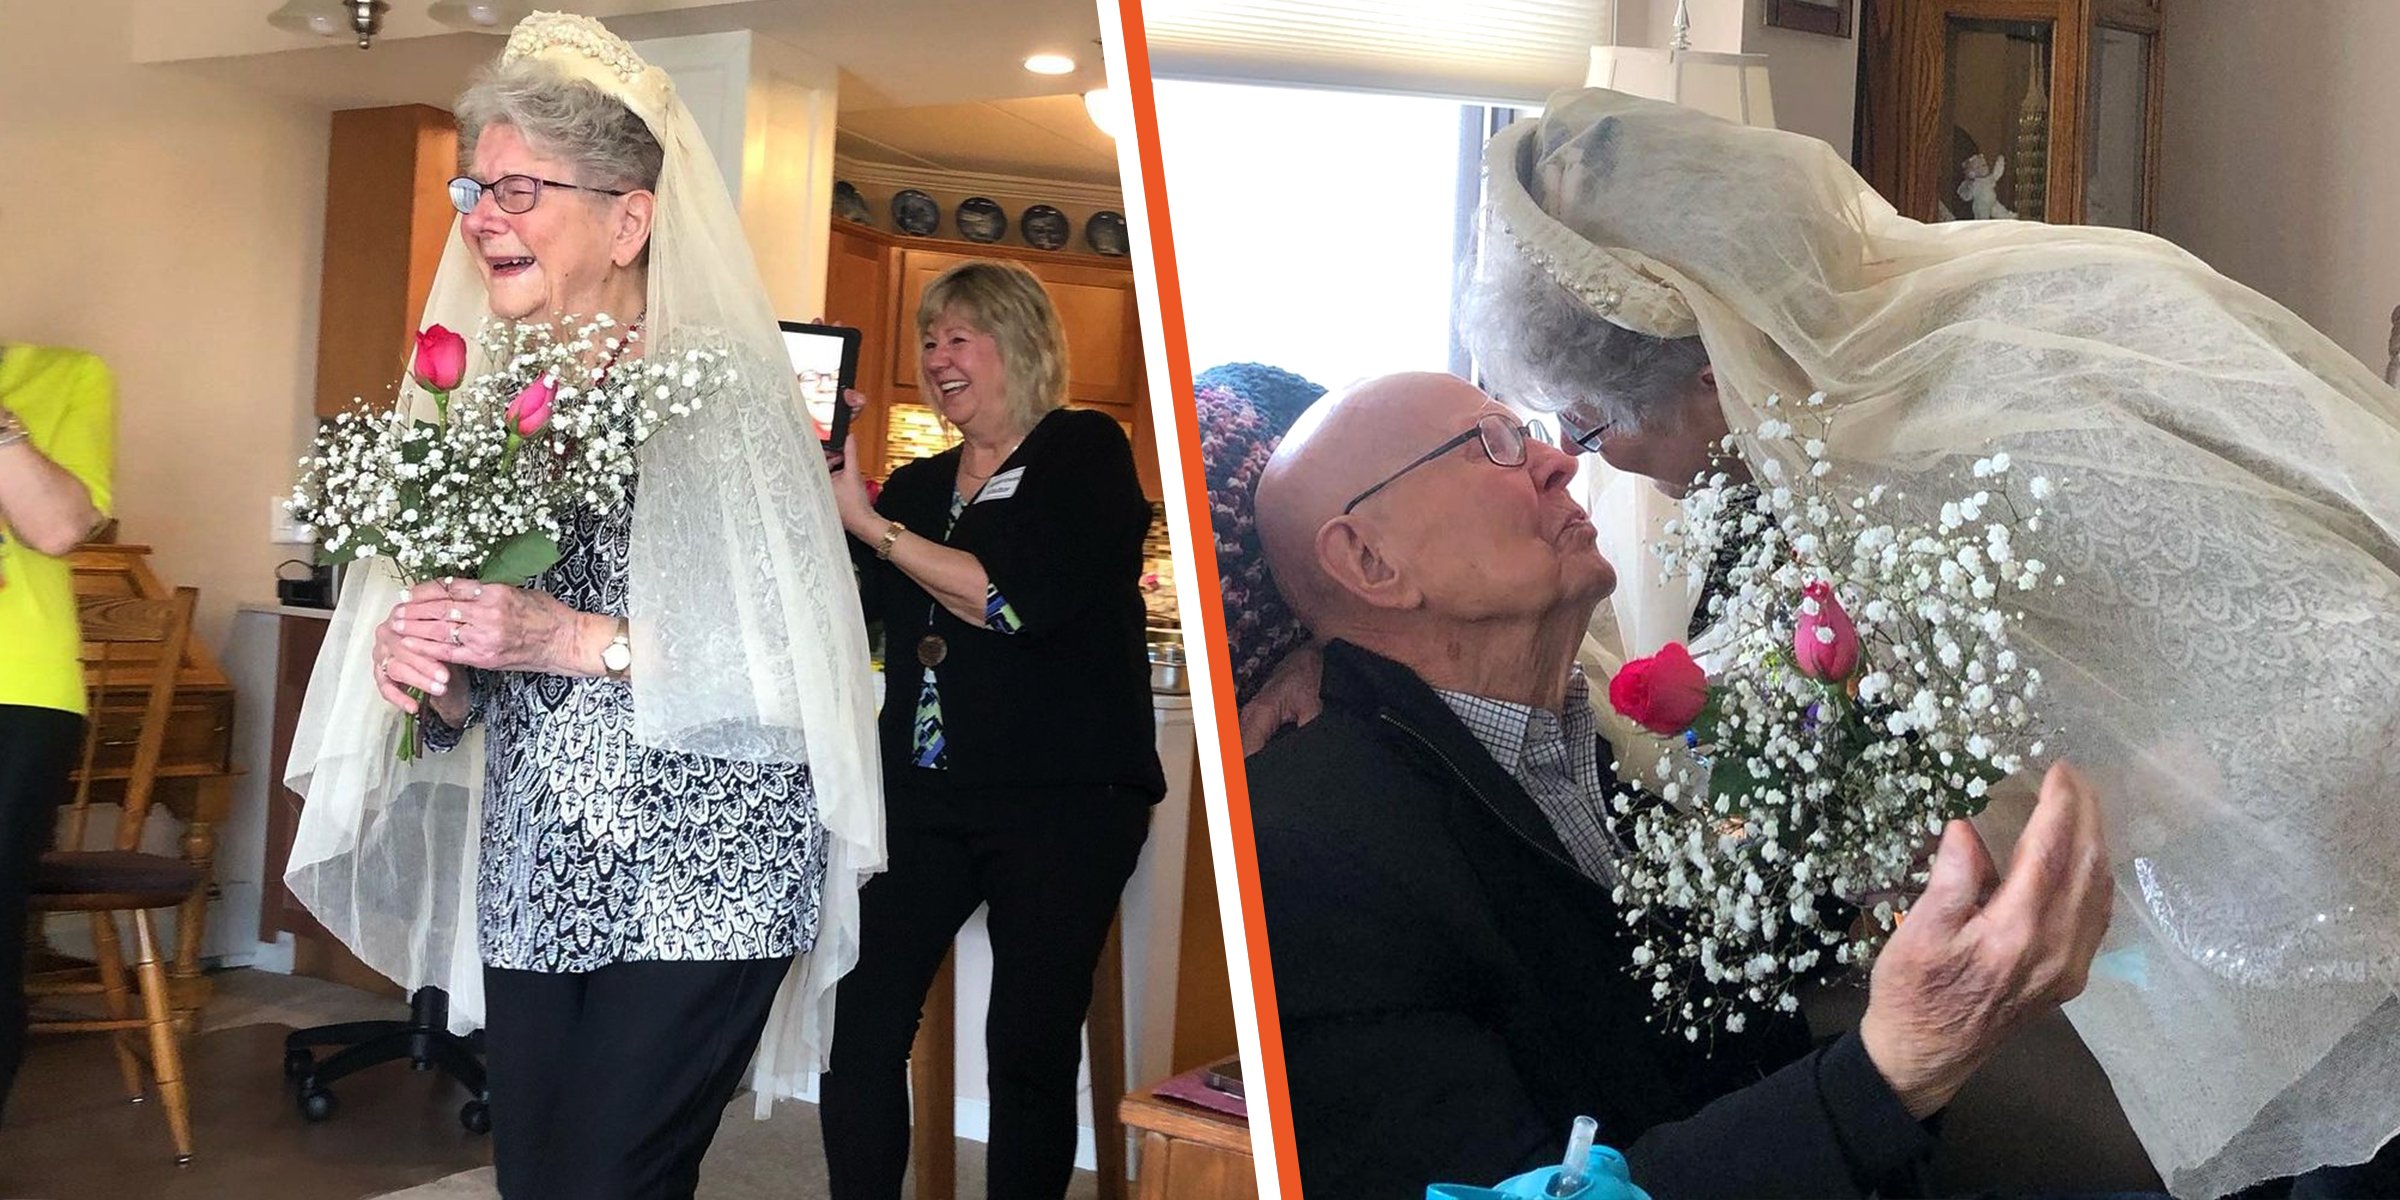 Couple Celebrating their 75th Anniversary | Source: instagram.com/chelseadyck